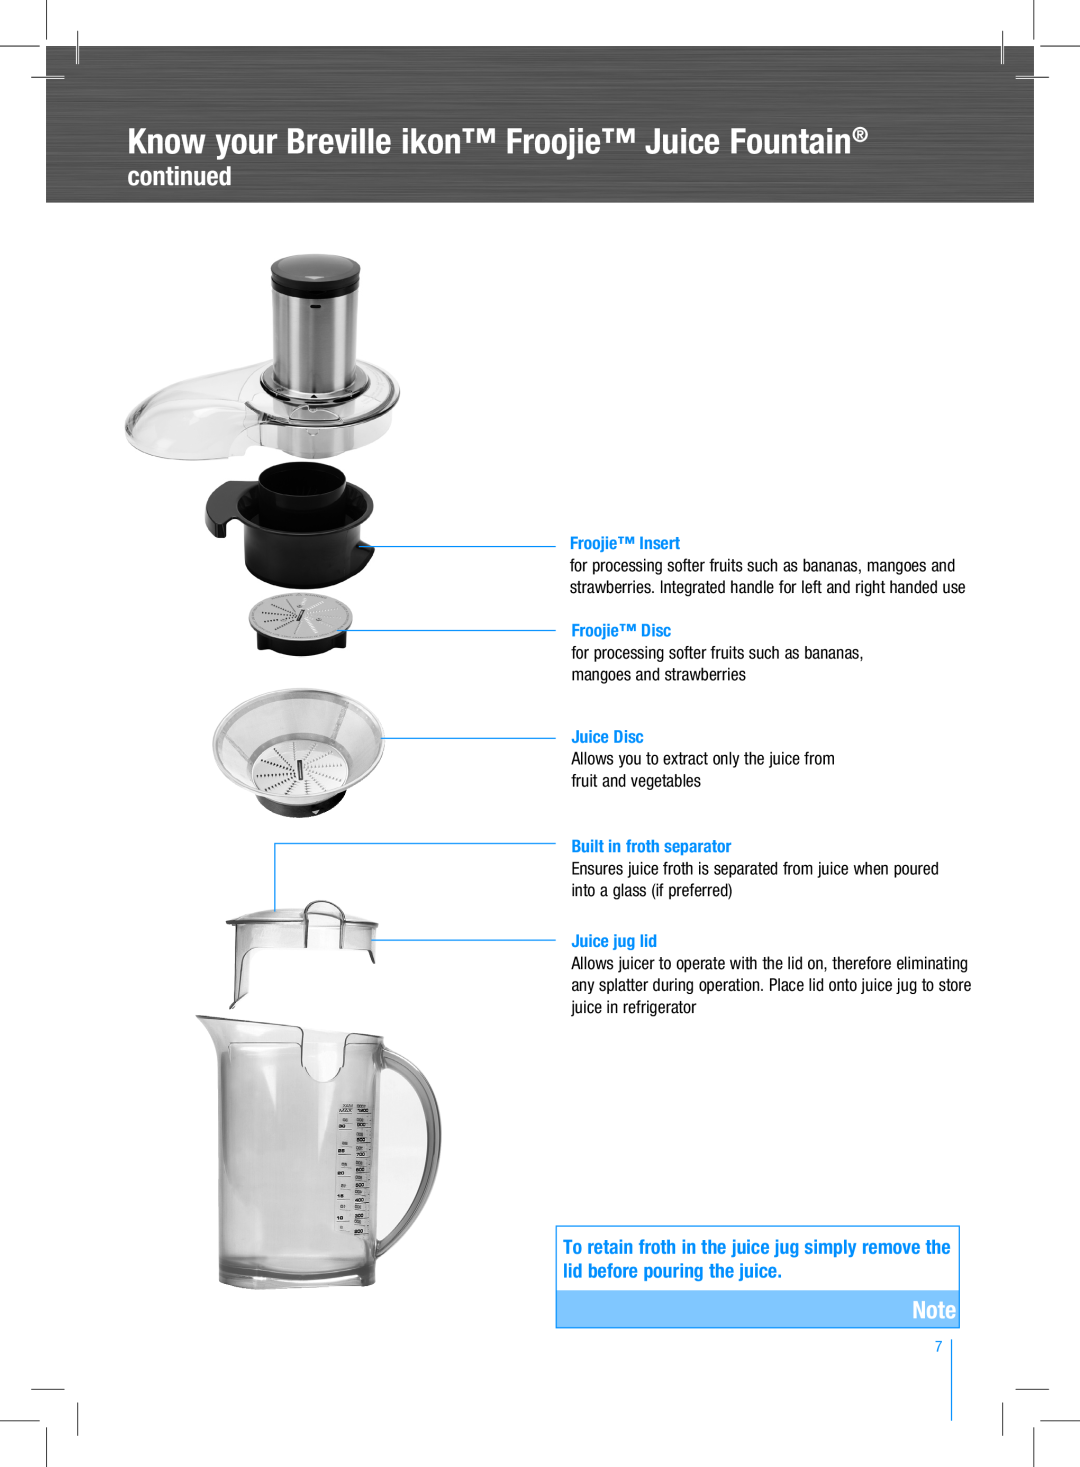 Breville BJE520 manual continued, Know your Breville ikon Froojie Juice Fountain, Froojie Insert, Froojie Disc, Juice Disc 